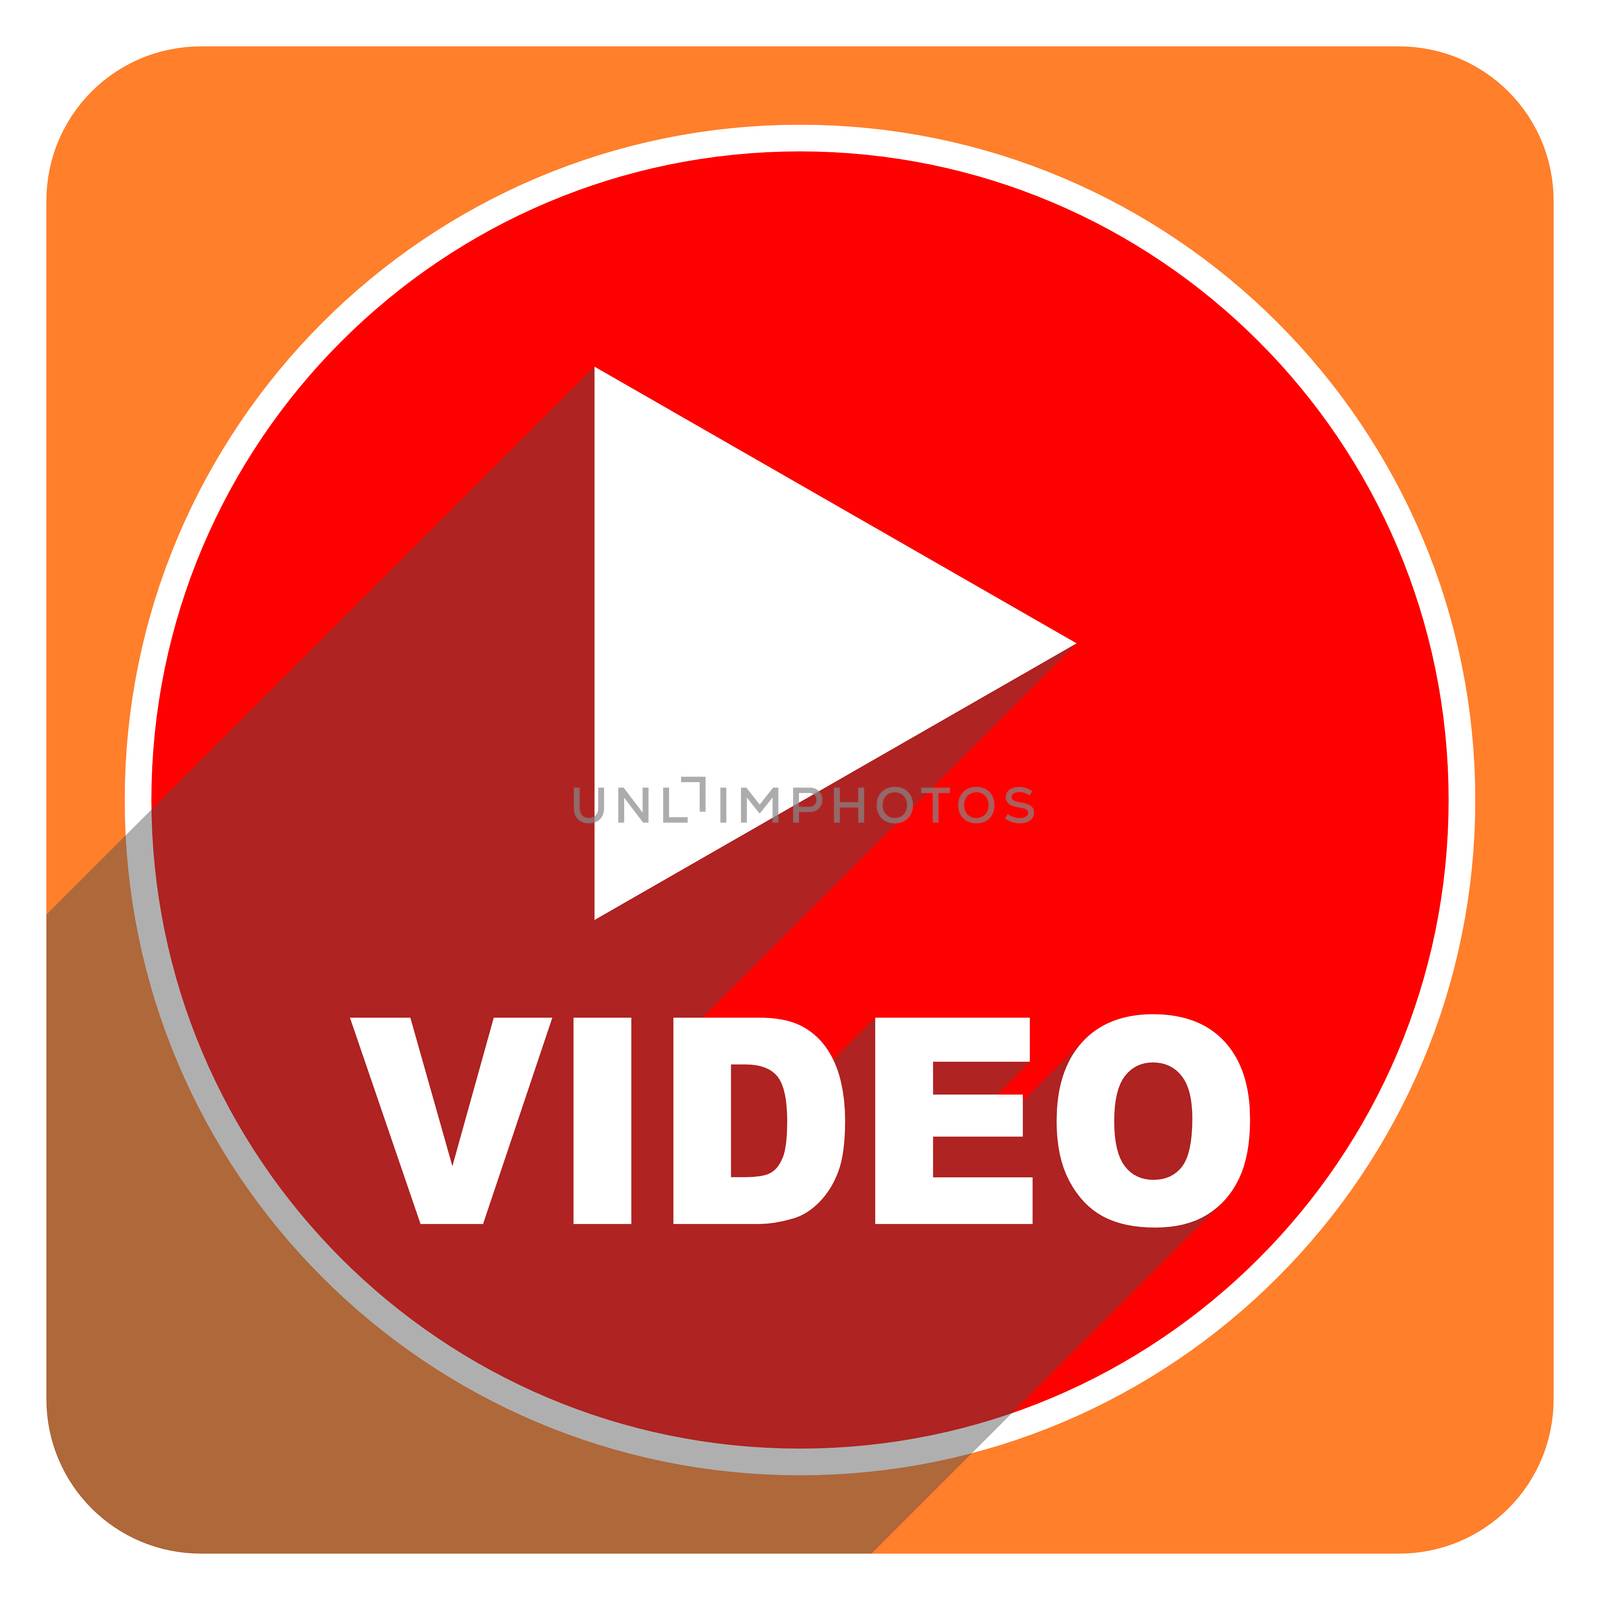 video red flat icon isolated